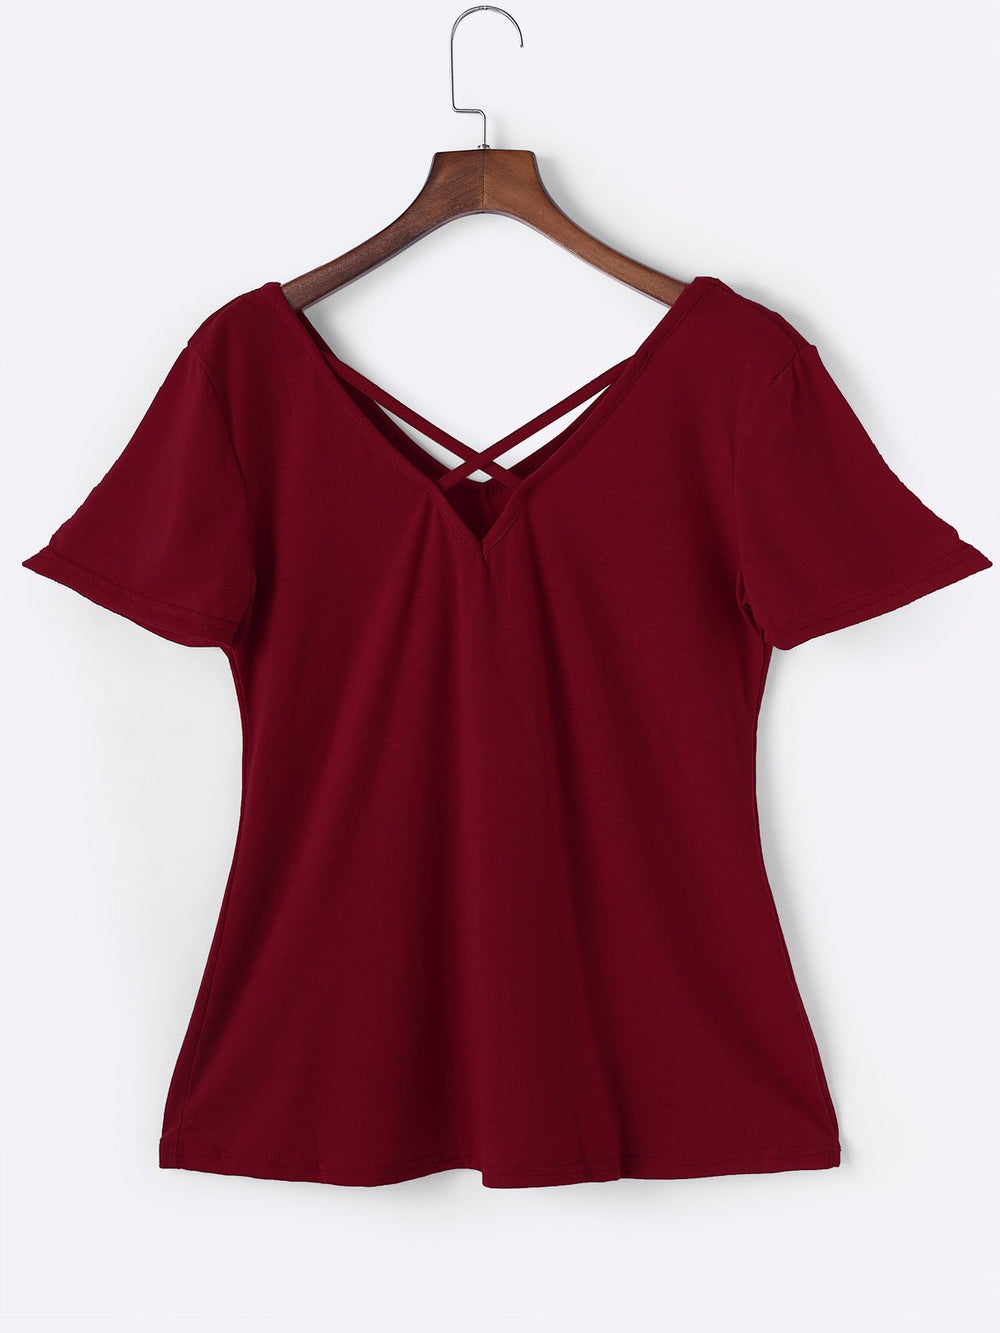 Womens Red T-Shirts